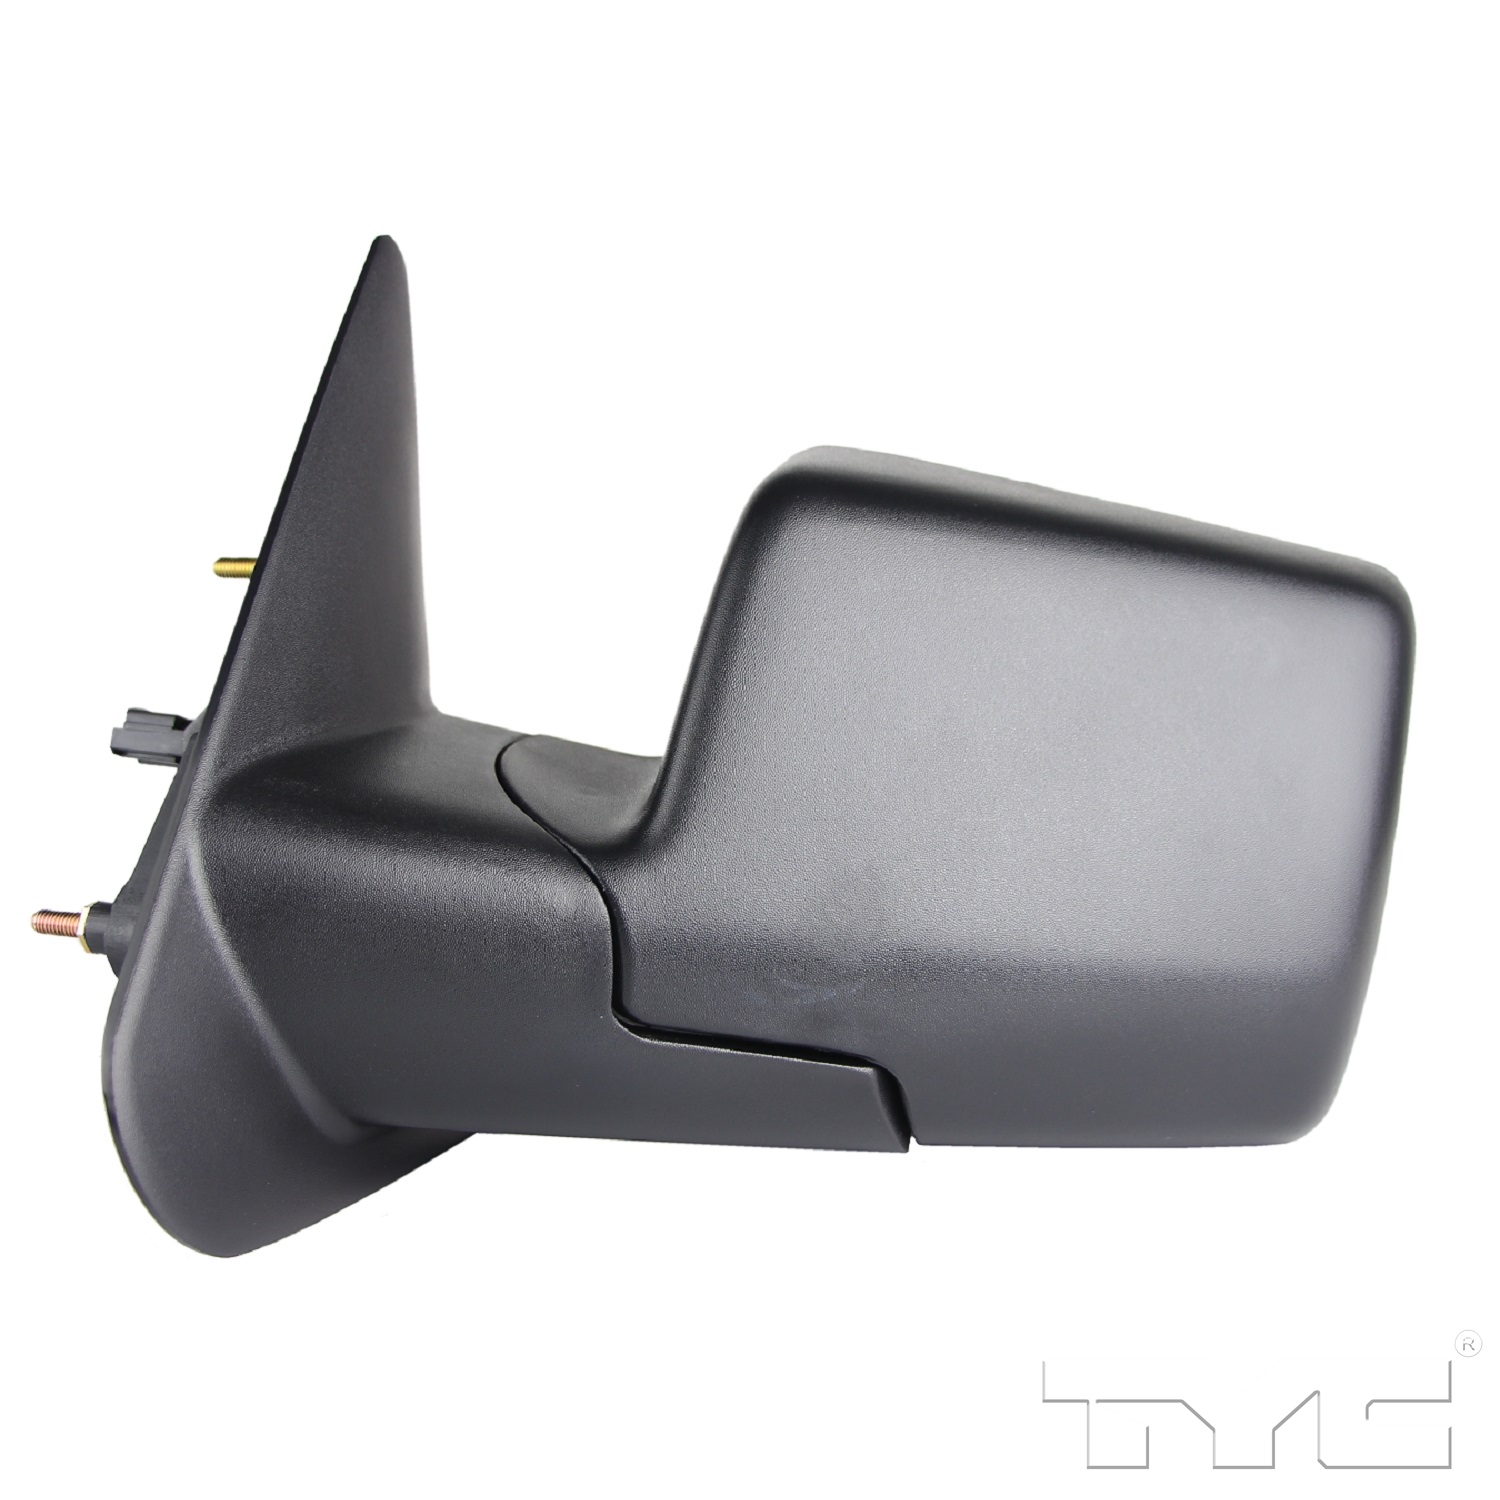 Aftermarket MIRRORS for FORD - RANGER, RANGER,06-11,LT Mirror outside rear view